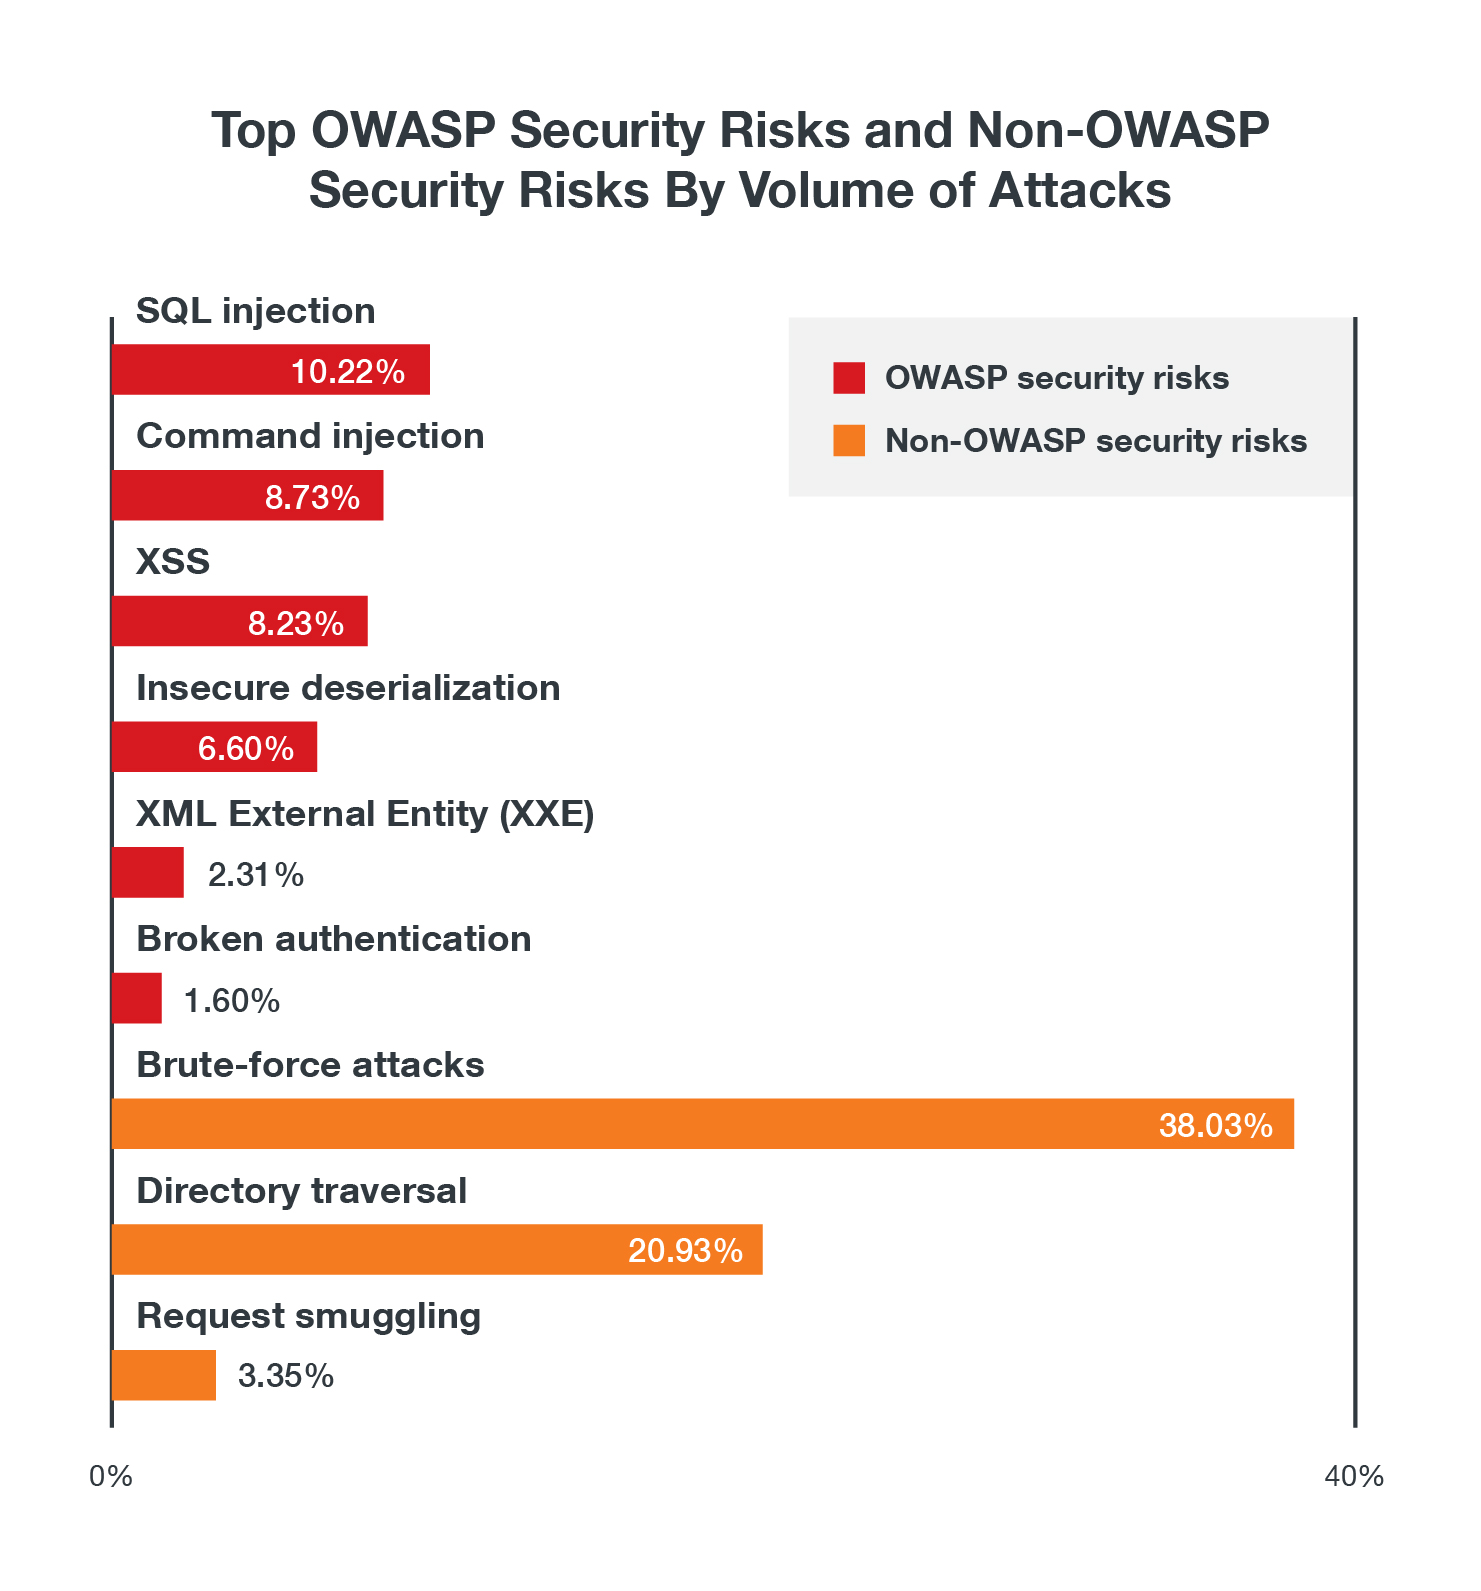 Volume of activity comparison between top OWASP security risks and non-OWASP